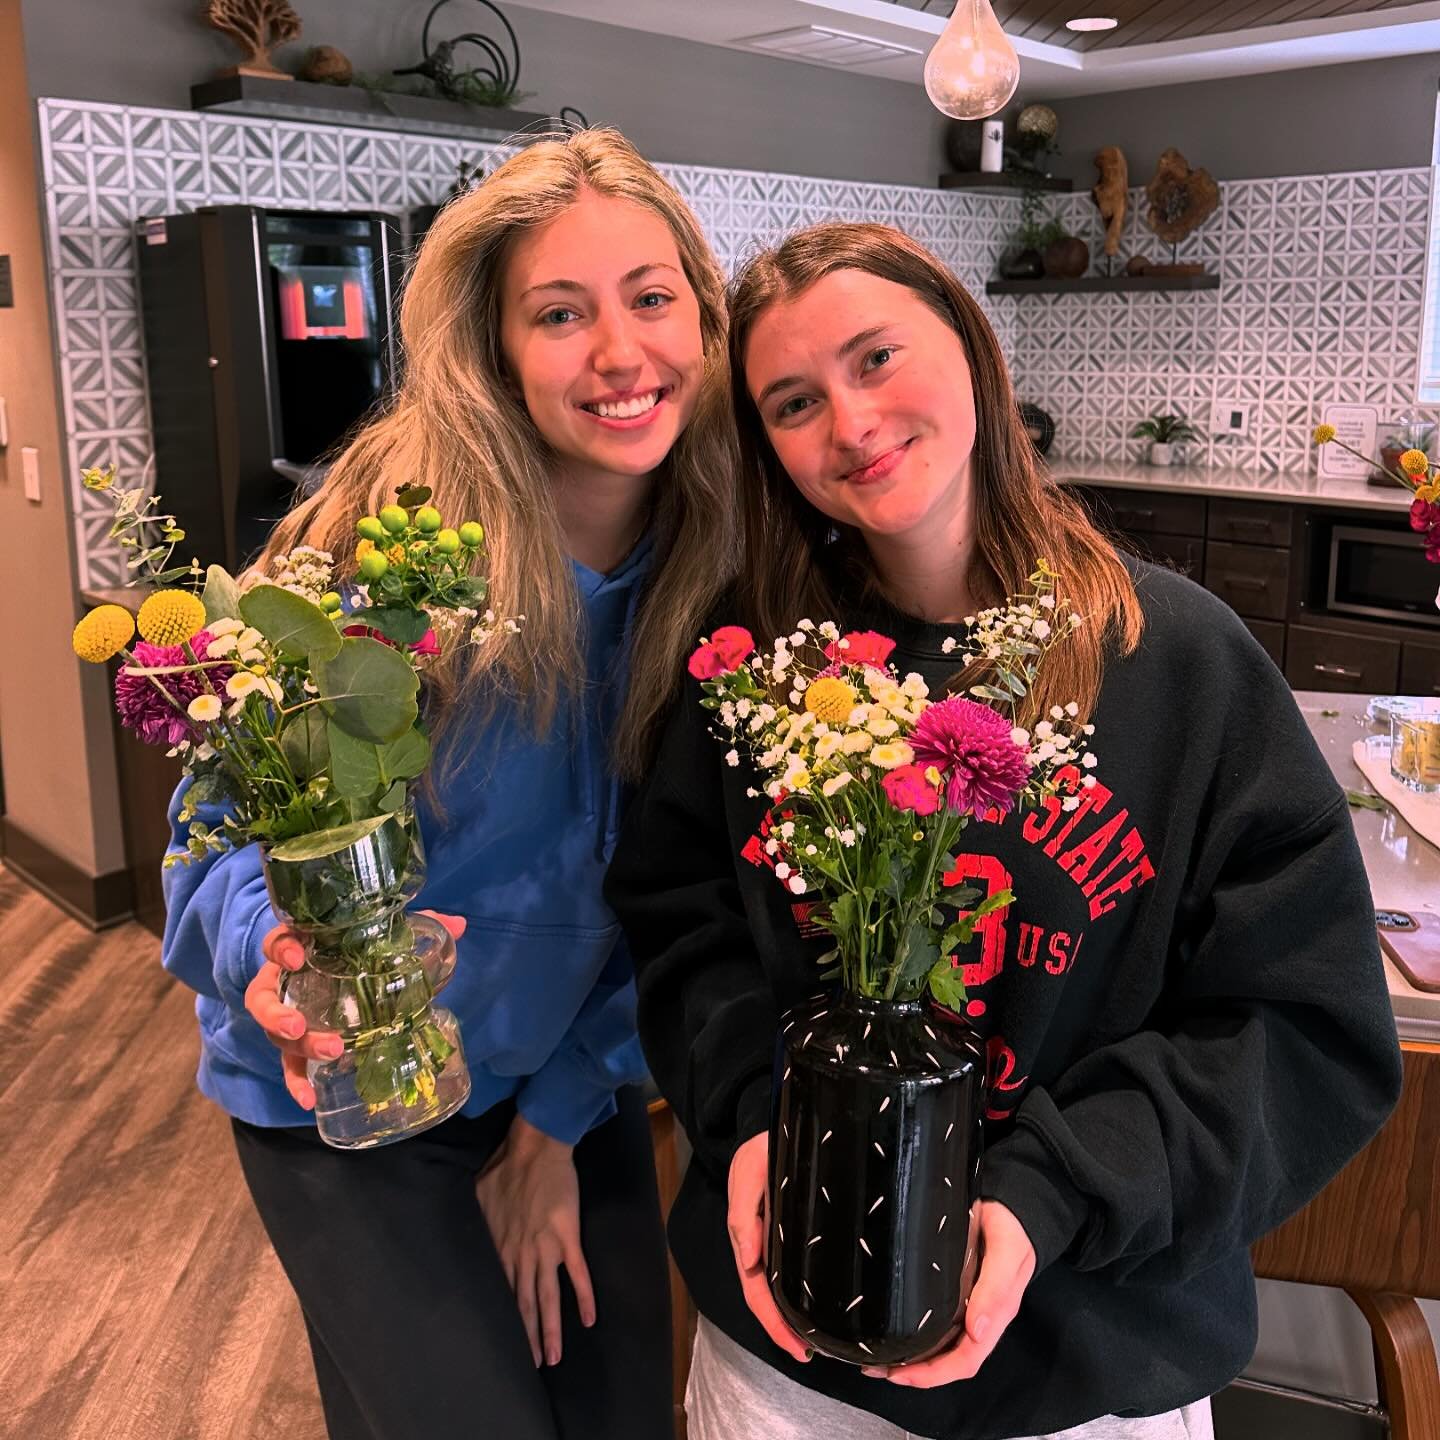 Thank you so much to all of our residents who stopped by for our Bouquet Bar! We had so much fun seeing everyone&rsquo;s creations, enjoy your May flowers! 🌷🌸 
#theaubrey #residentevents #residentlove #614living #aprilshowersbringmayflowers #flower